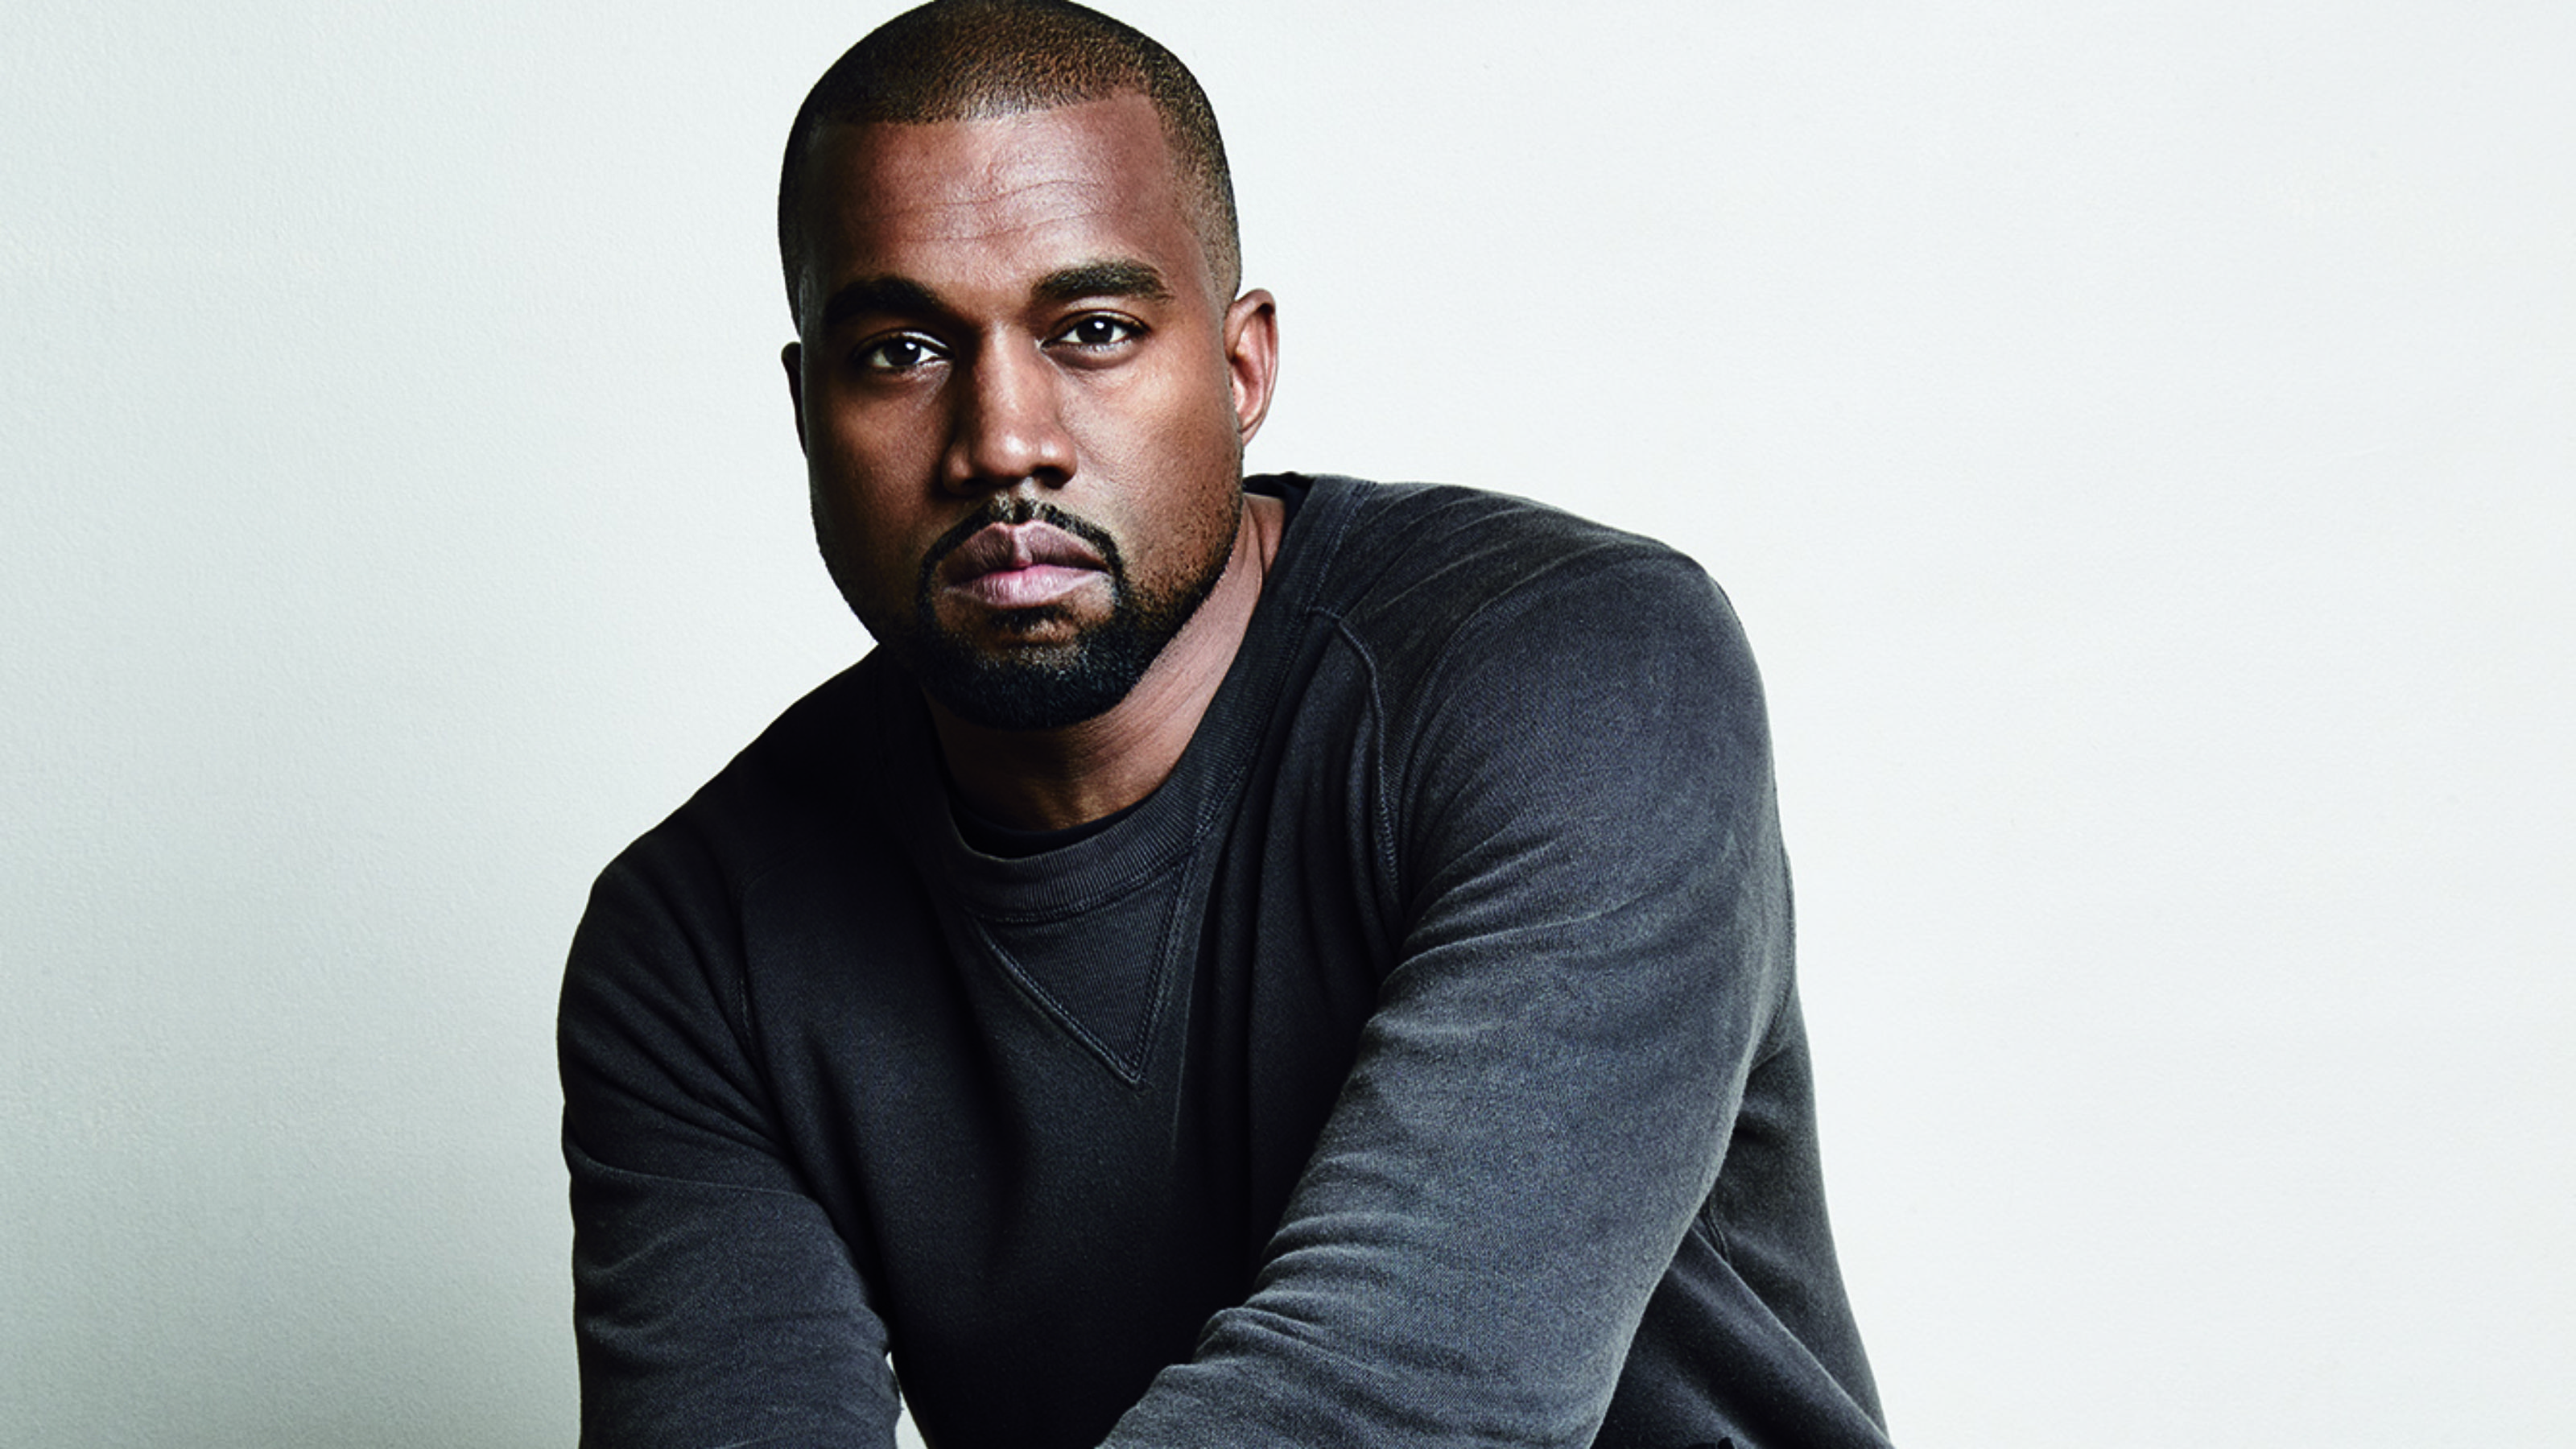 Kanye West to lose $27.3m after tour cancellation, but will insurance kick in?